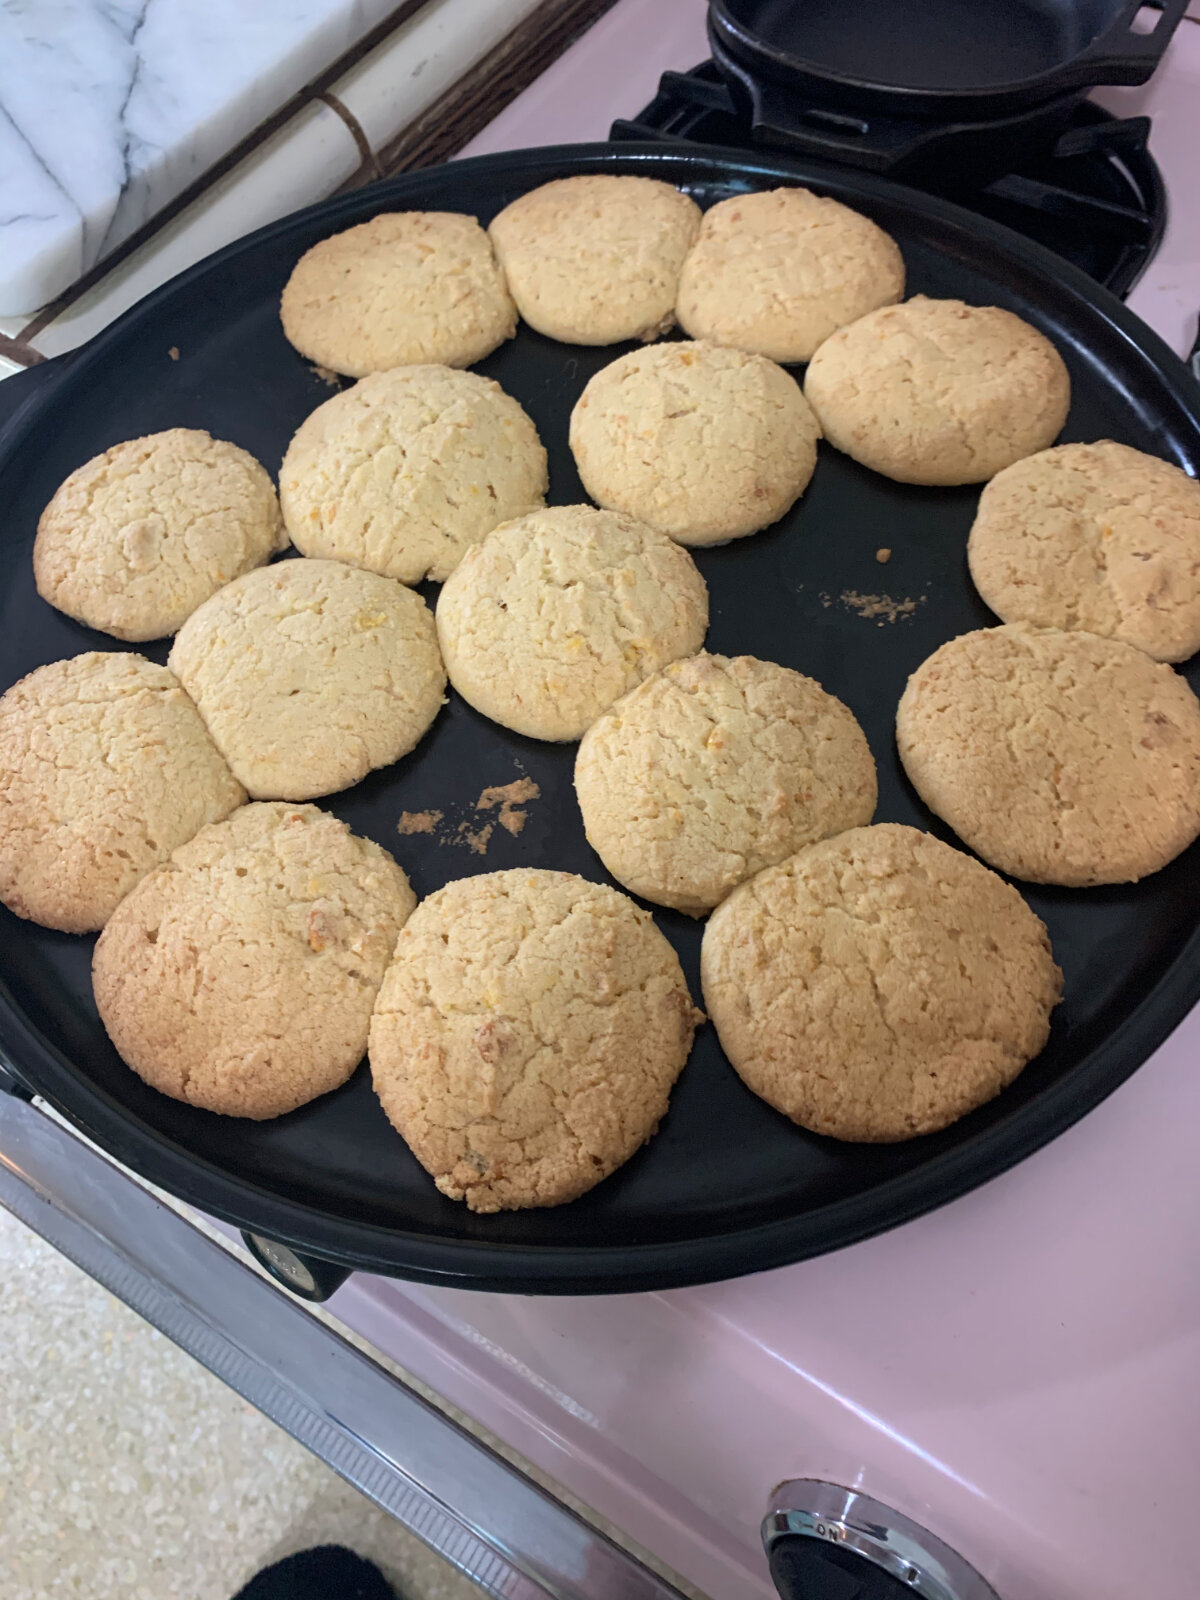 Corn cookies fresh from the oven